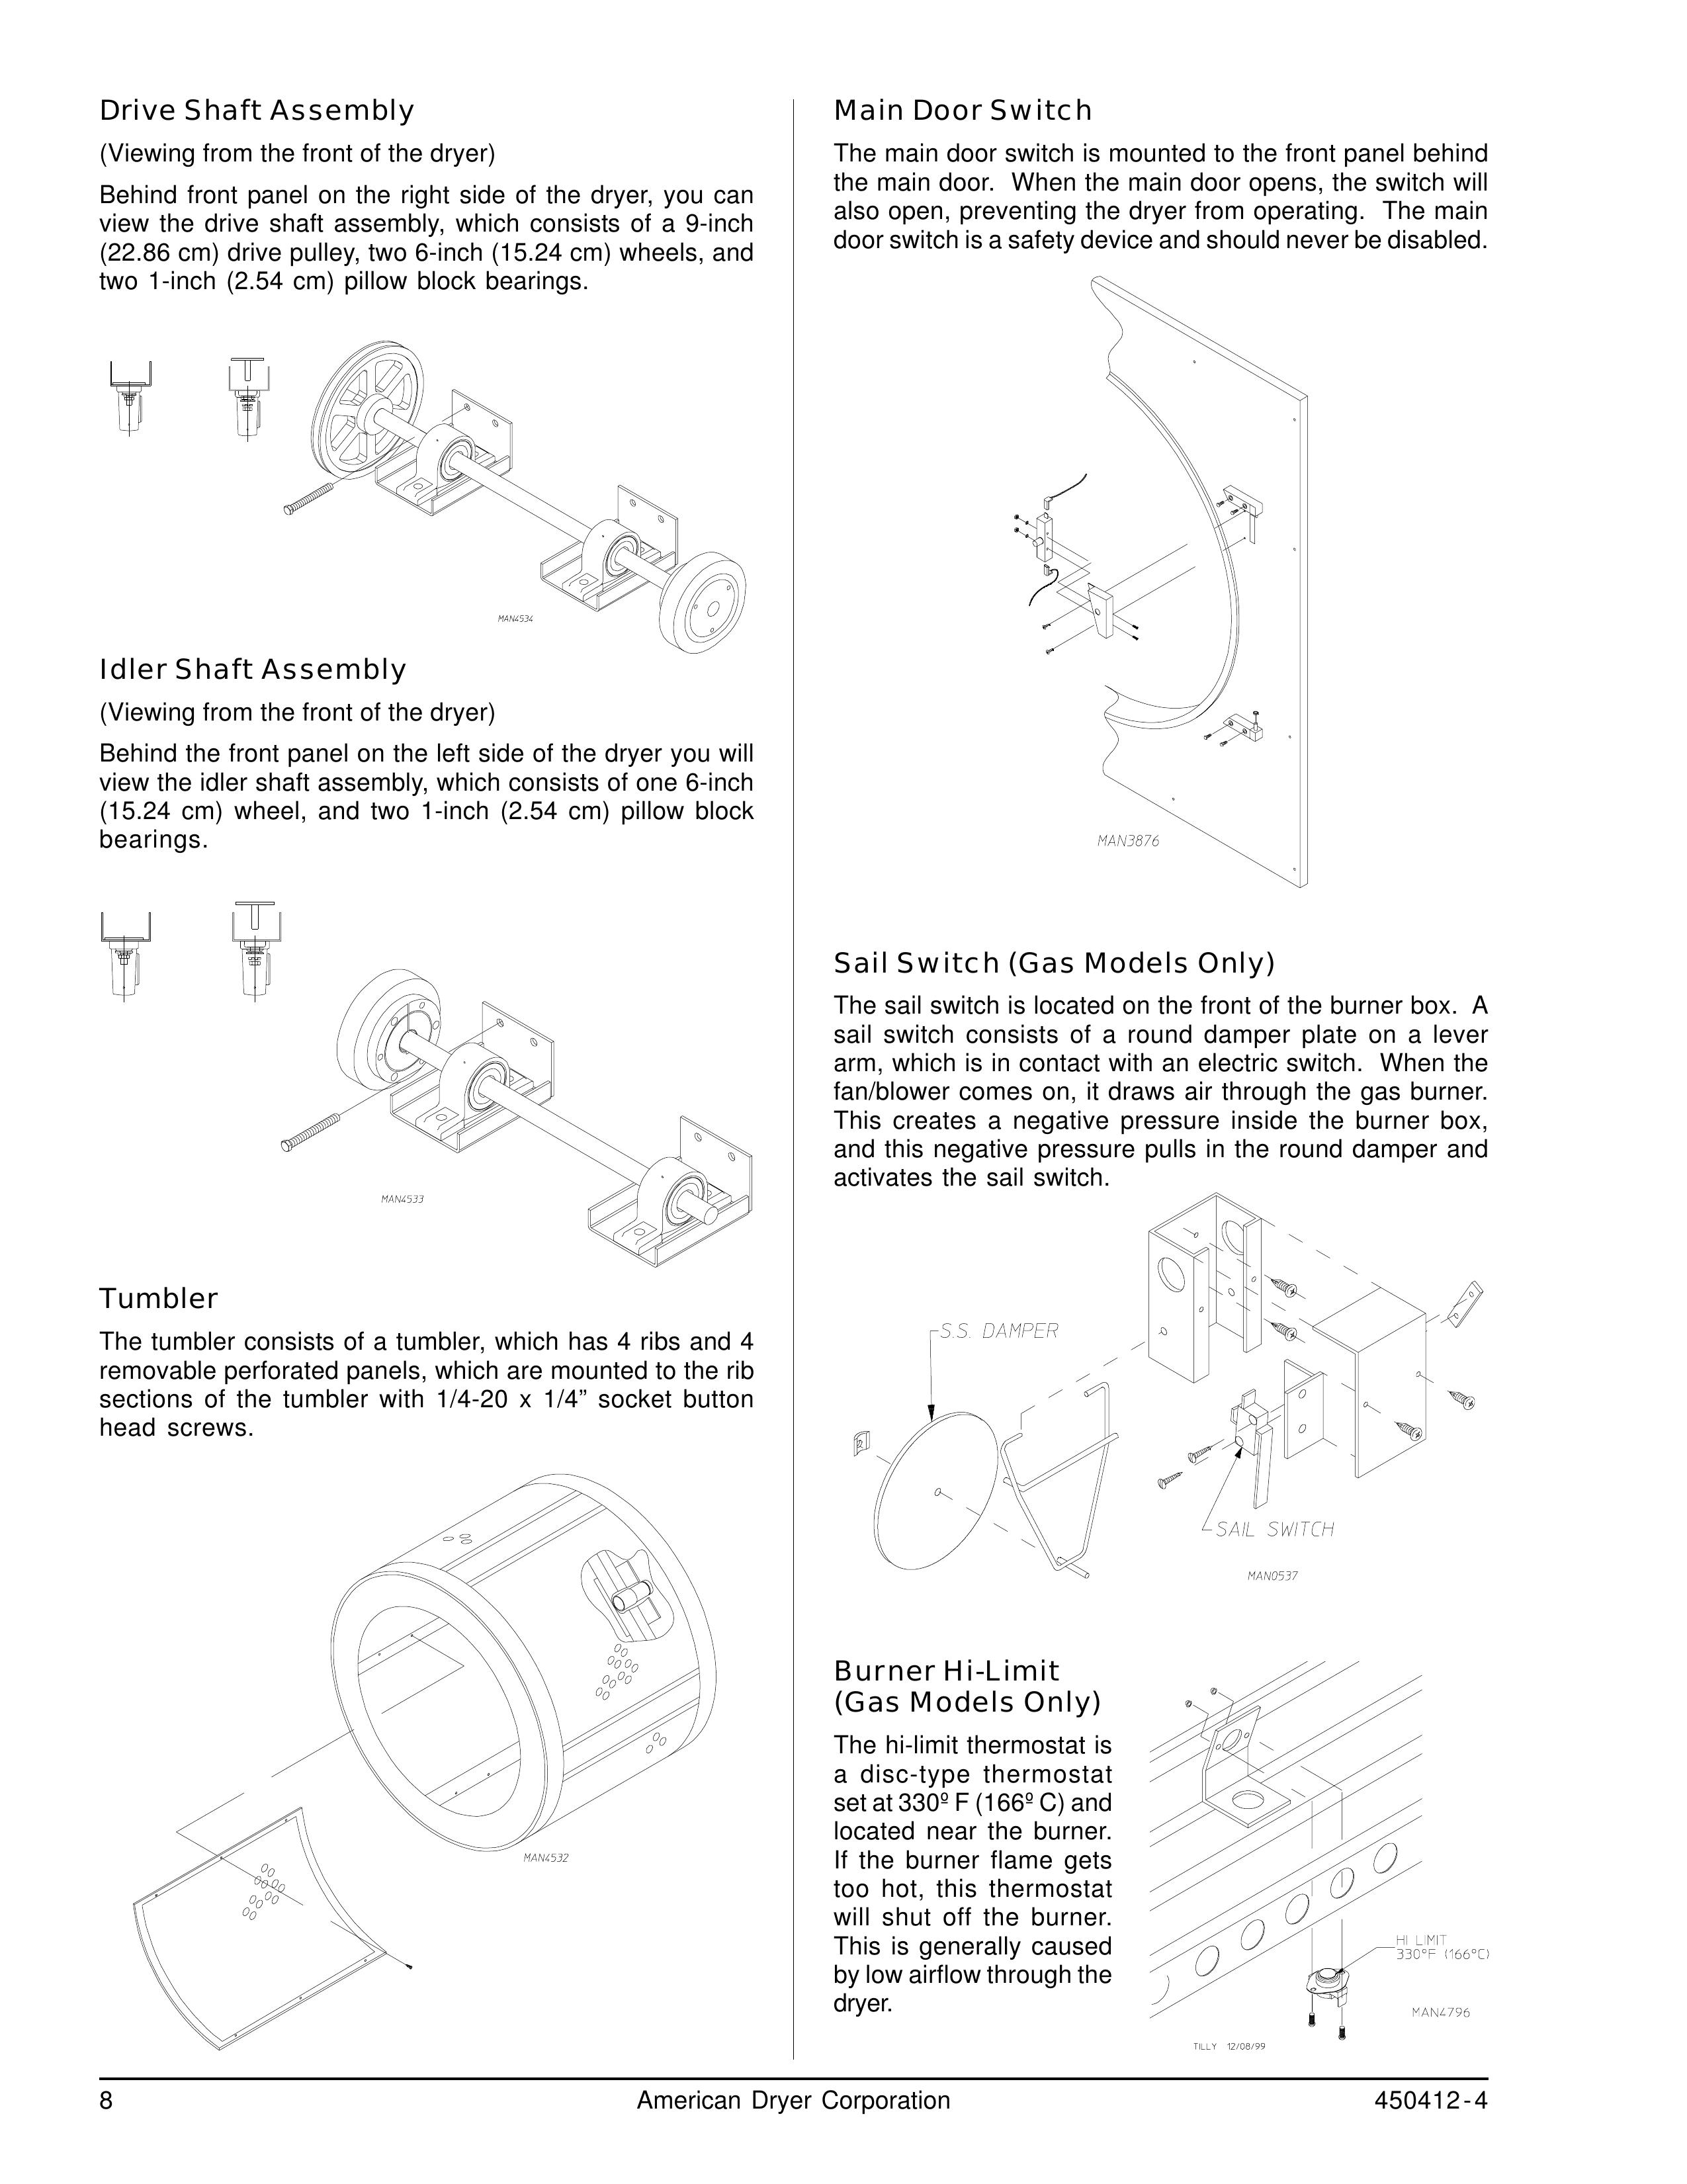 ADC ML-122 Clothes Dryer User Manual (Page 8)